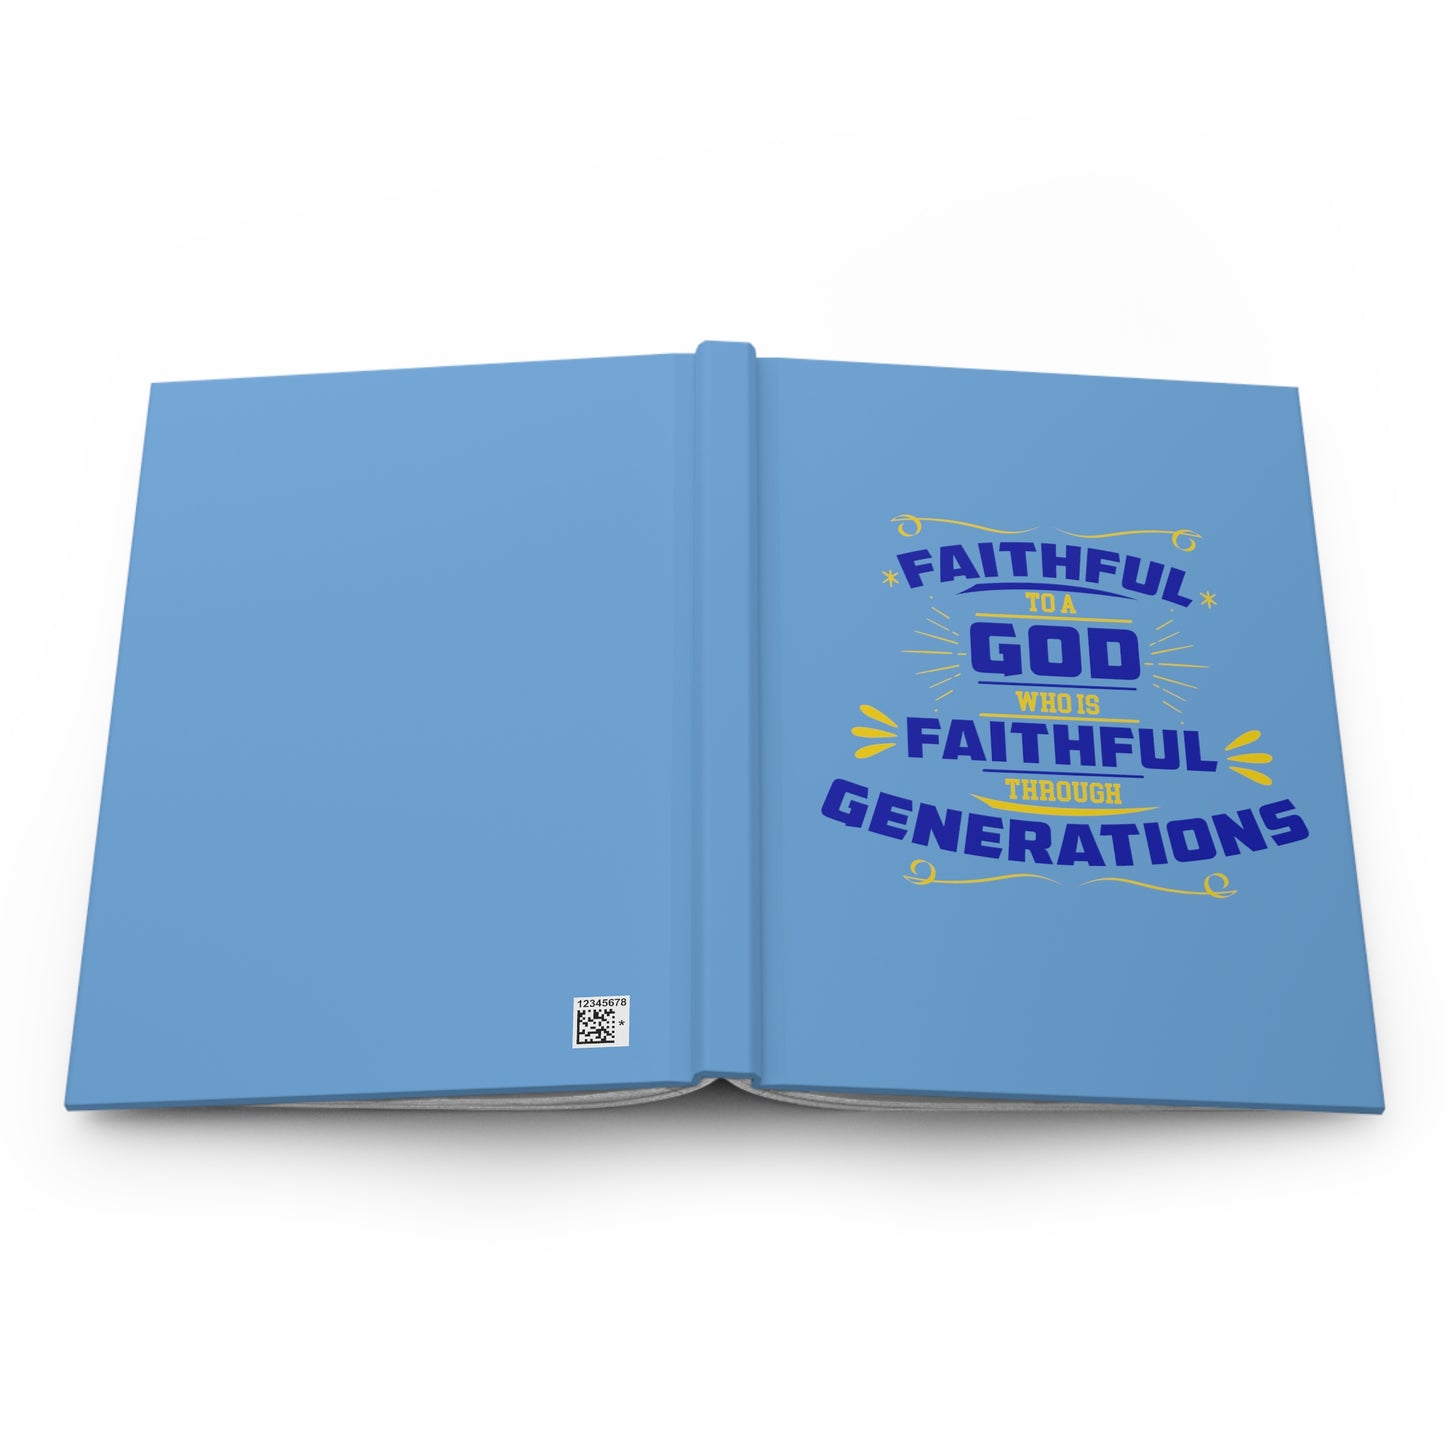 Faithful To A God Who Is Faithful Through Generations Hardcover Journal Matte